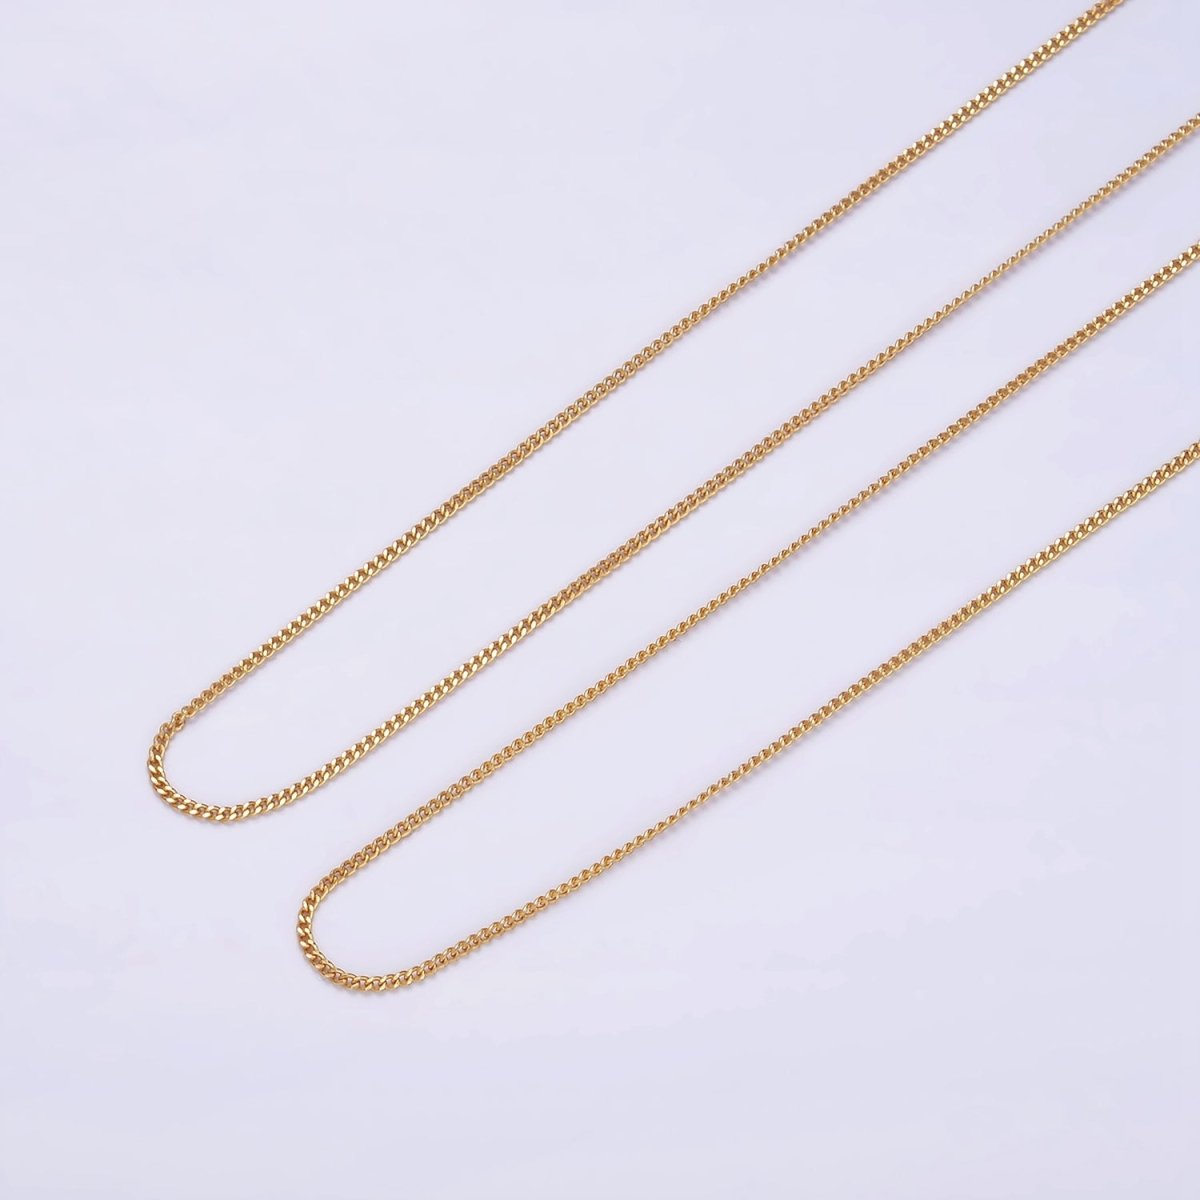 24K Gold Vermeil Necklace Curb Chain, 925 Sterling Silver Curb Necklace Chain w/ Heavy Gold Plated | WA-2151 WA-2152 Clearance Pricing - DLUXCA